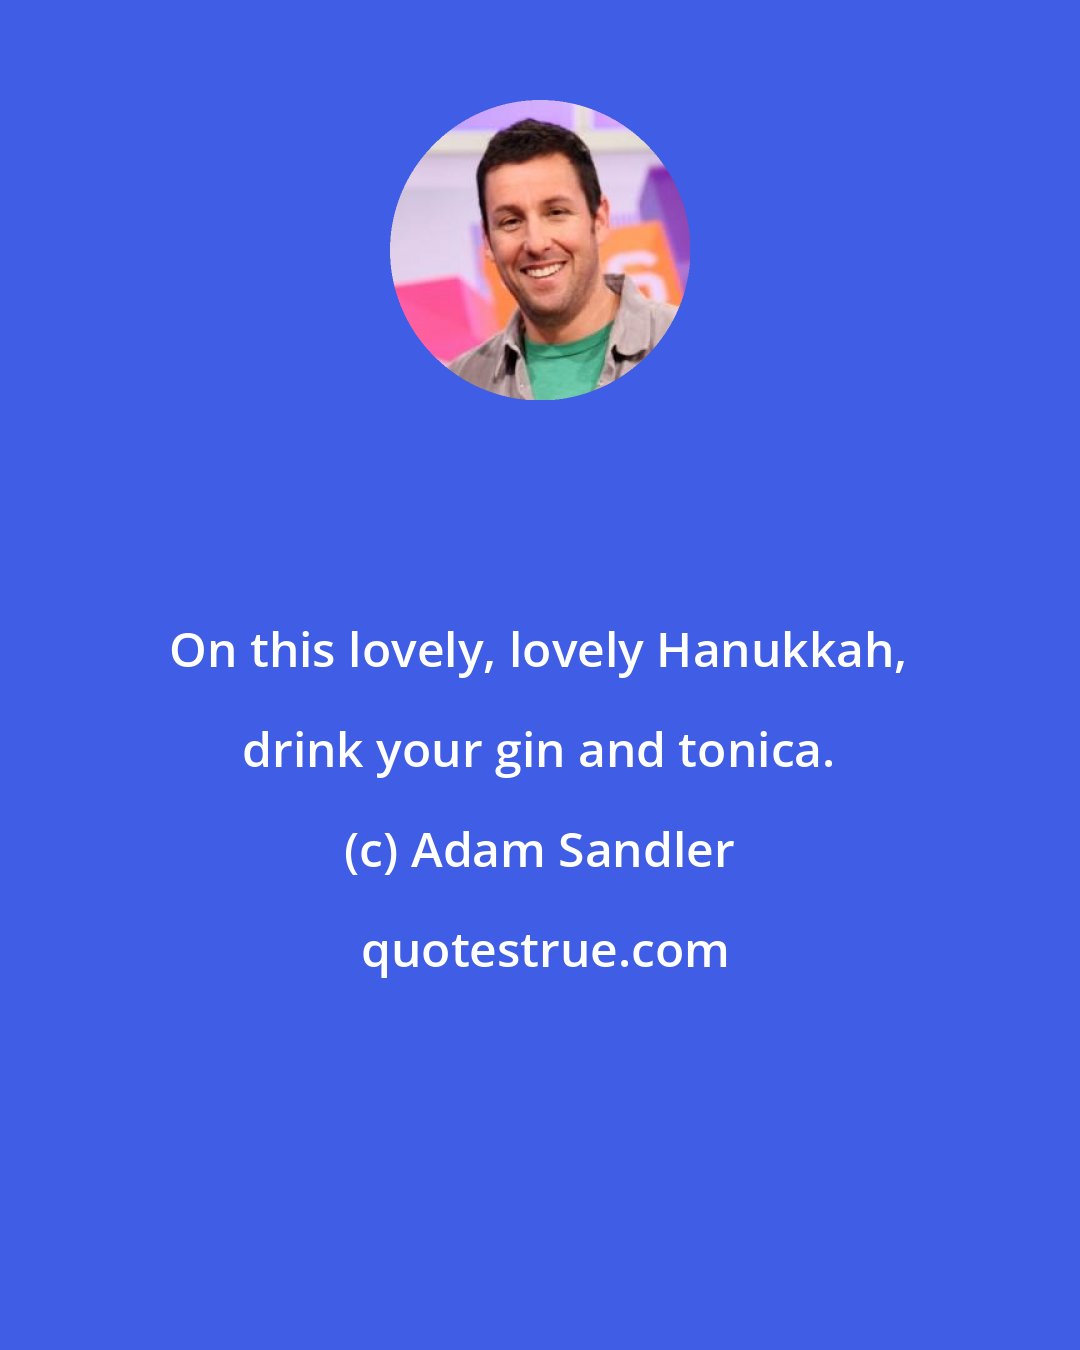 Adam Sandler: On this lovely, lovely Hanukkah, drink your gin and tonica.